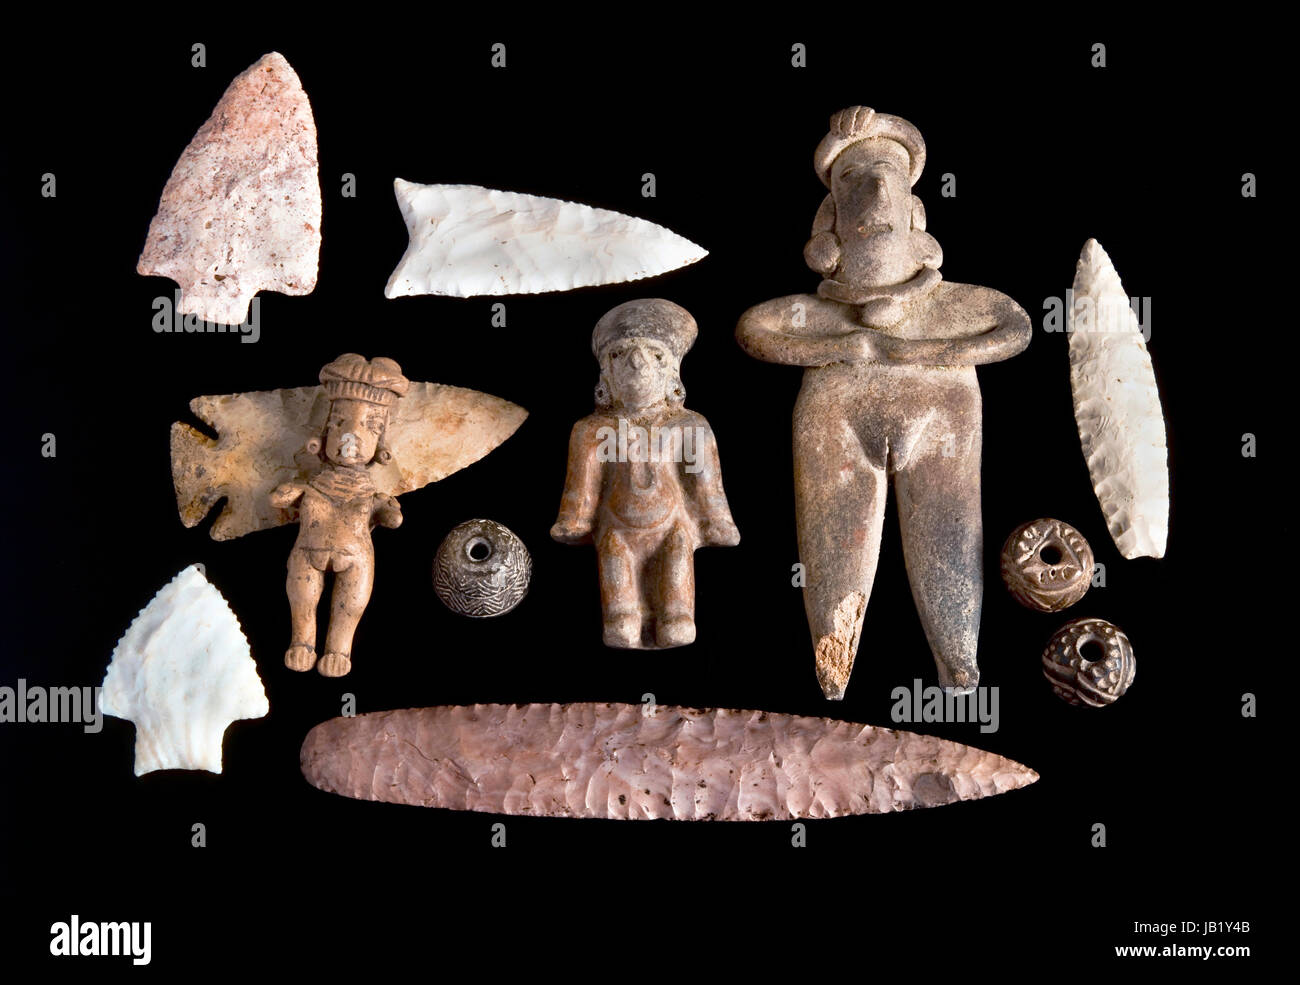 Real Pre Columbian figures,spindle whorls and arrowheads. Stock Photo